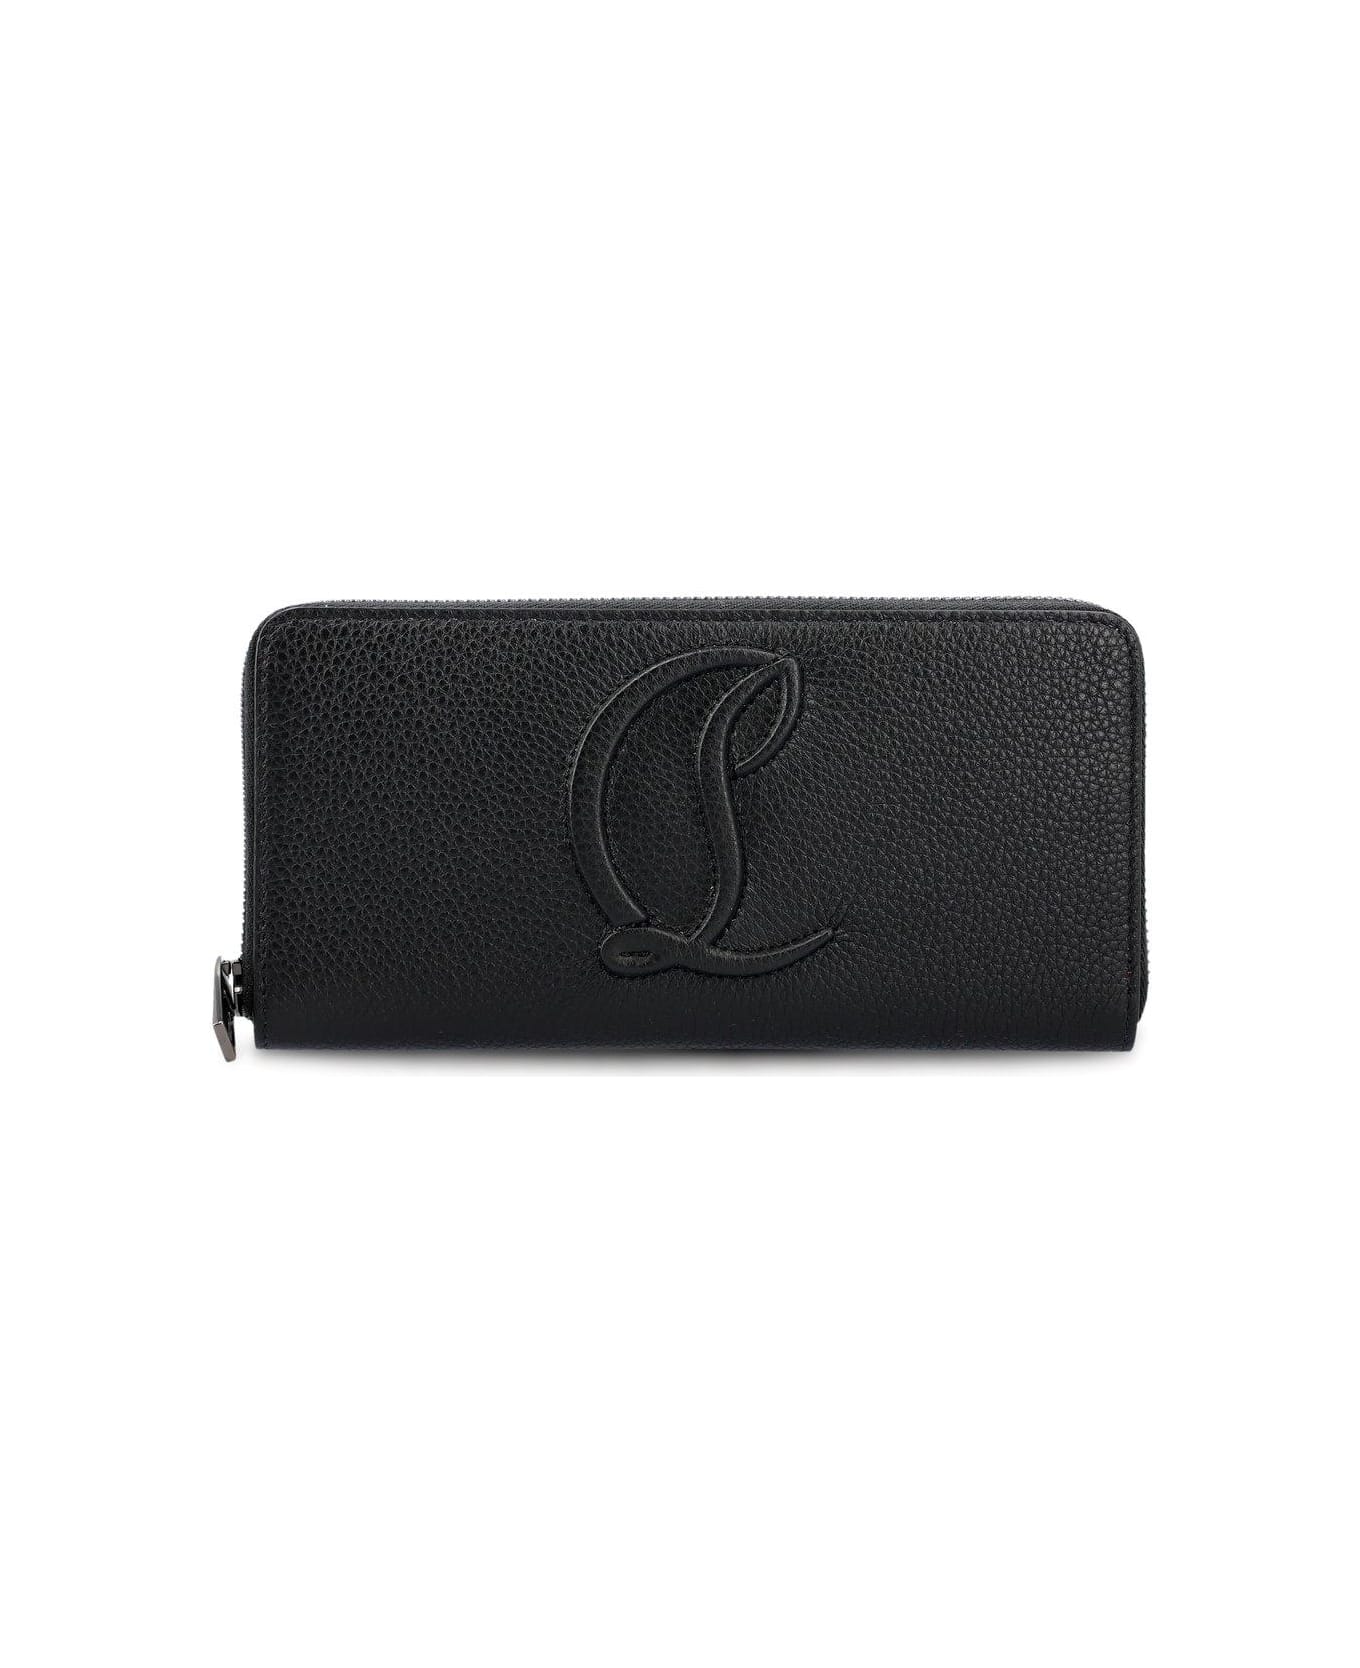 Christian Louboutin By My Side Zip-around Wallet - Black/black